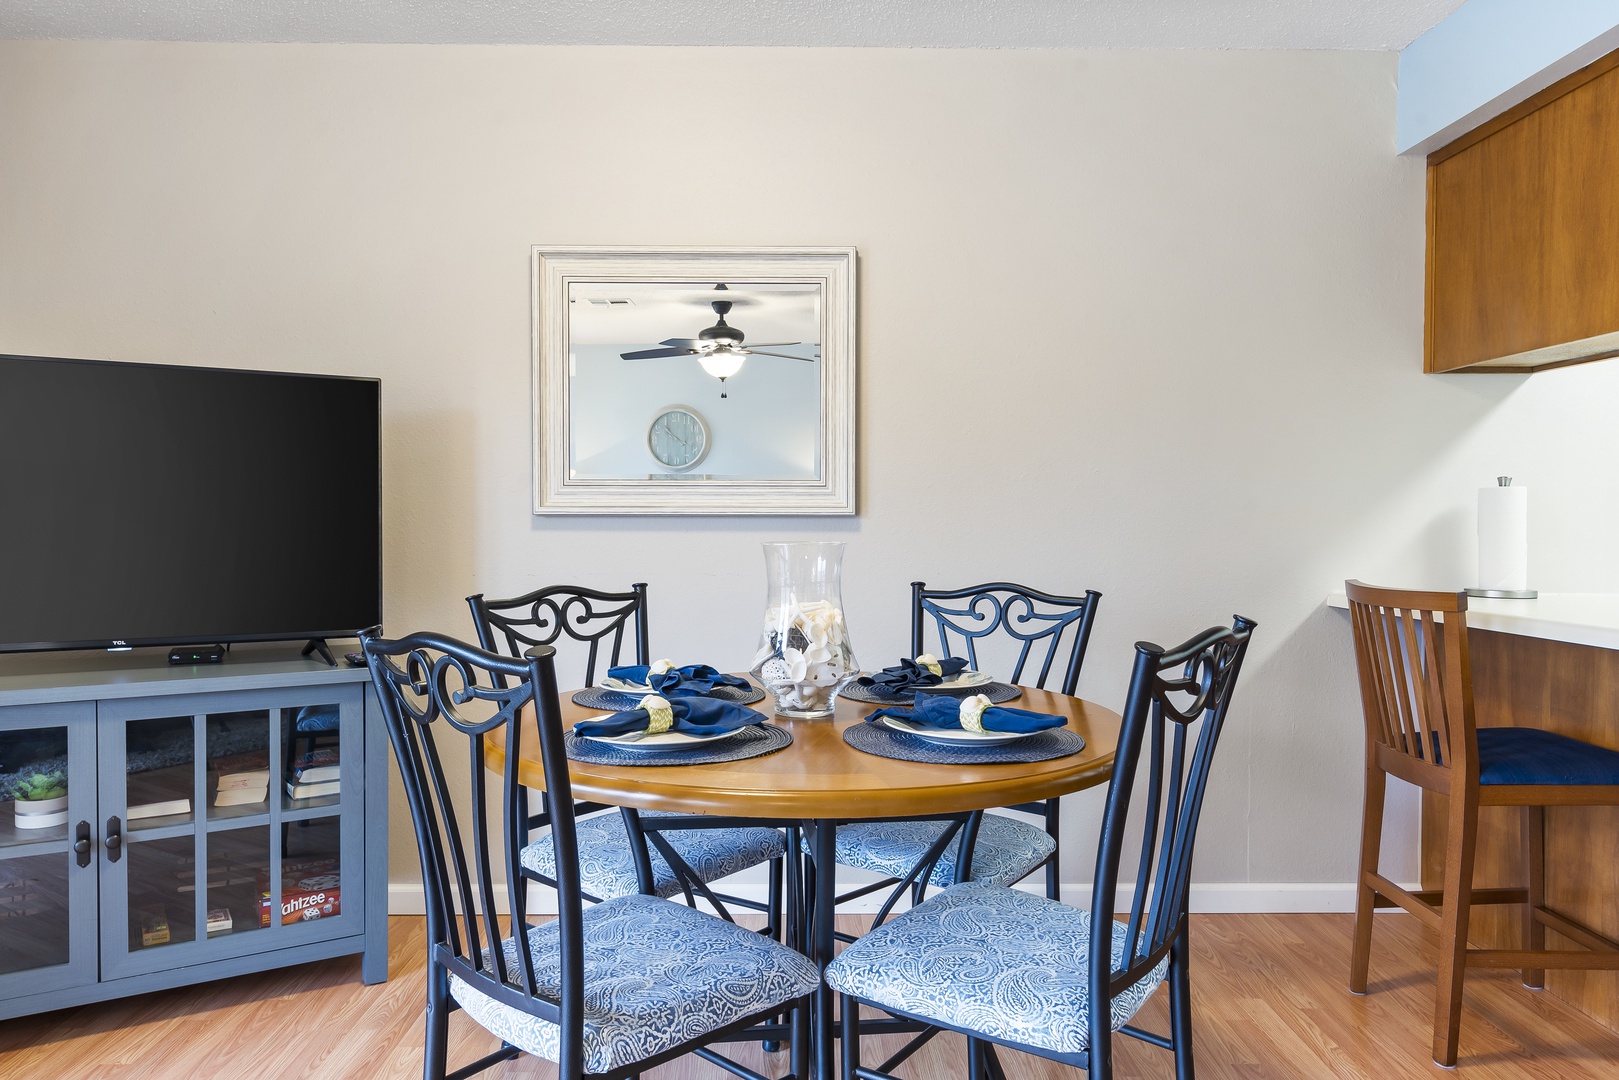 Dining table with seating for 4